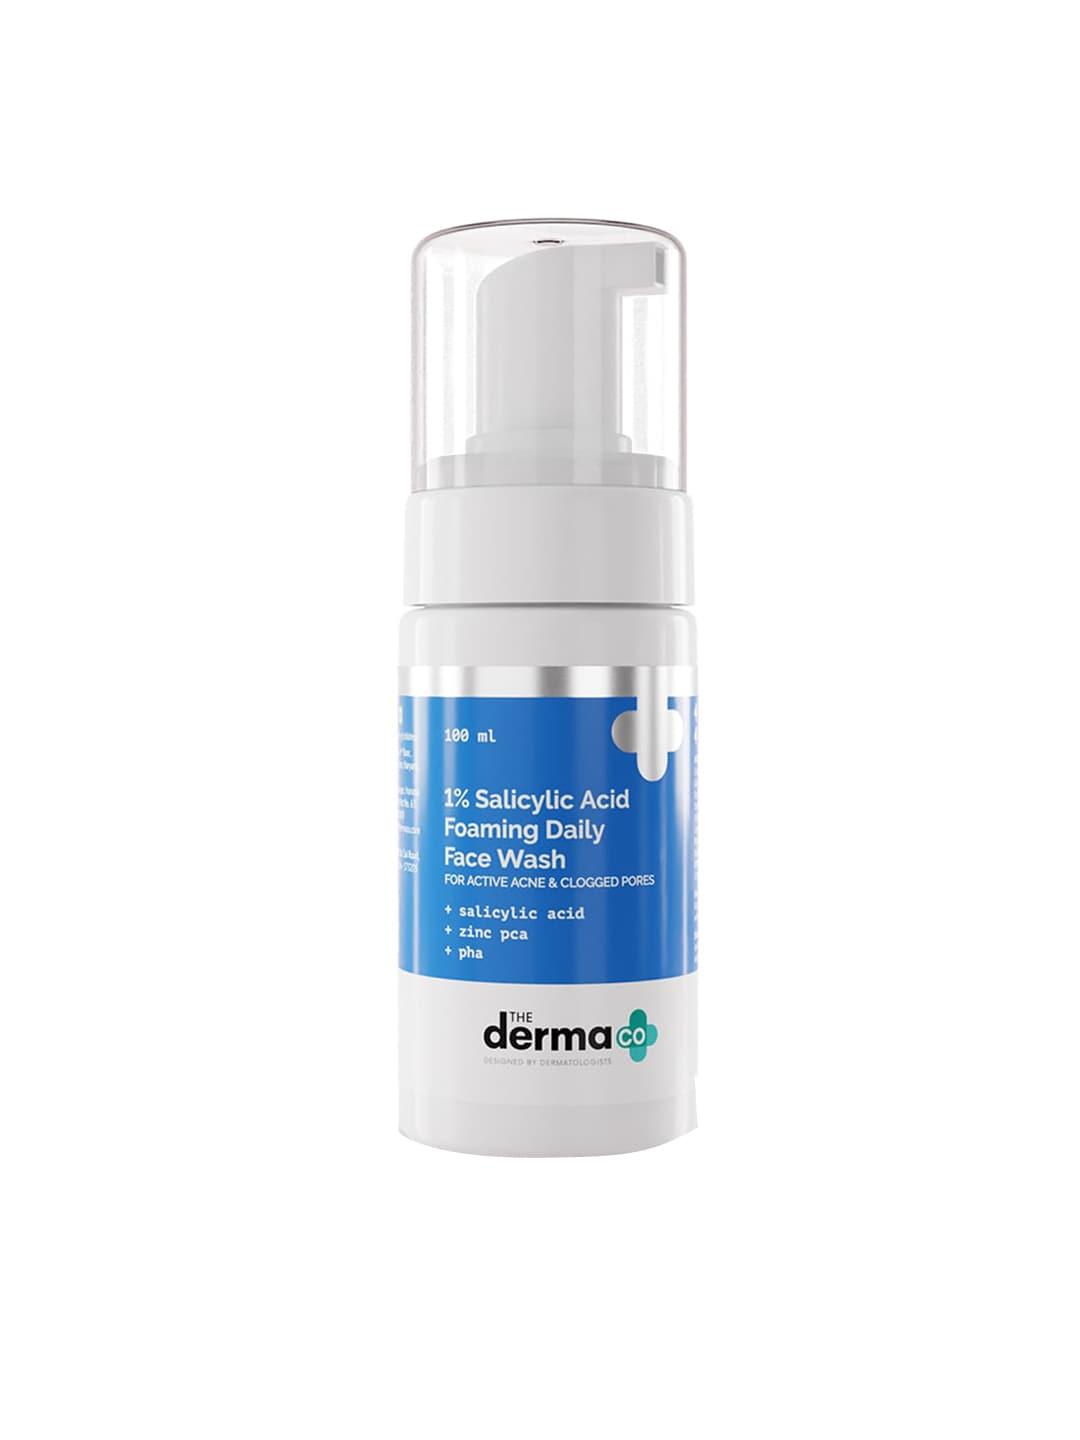 the derma co. white 1% salicylic acid foaming daily face wash with salicylic acid & for active acne -100 ml